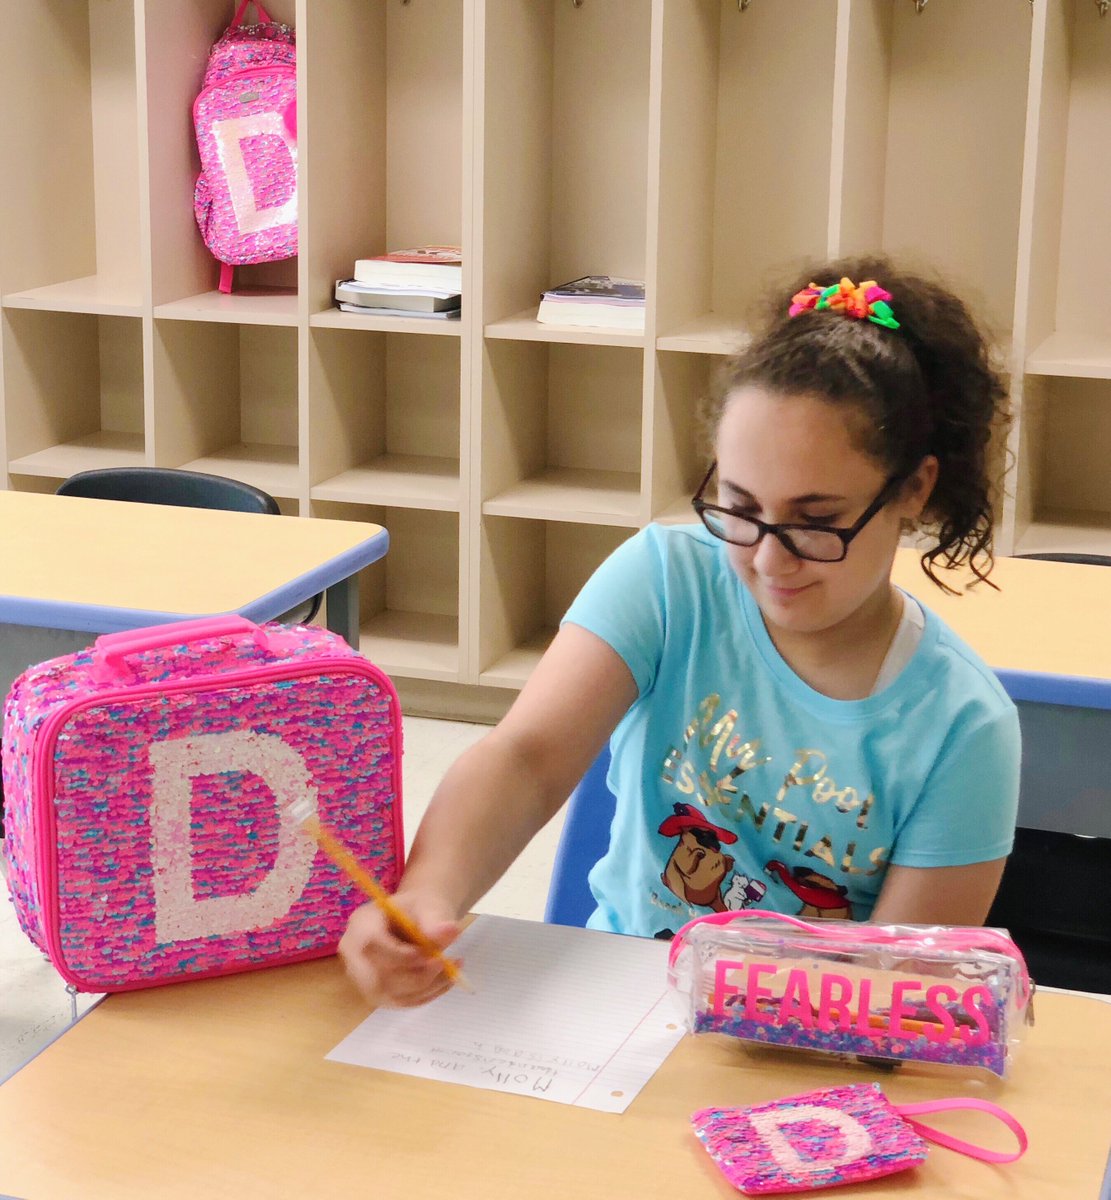 Today #ontheblog we are sharing our back to school essentials. You know your kids want some cool flip sequins on their backpack & lunchbox. cookwith5kids.com/2018/06/back-t… #livejusticebts #ad #LiveJustice #backtoschoolgear #initials #girlsRule #getreadyforschool